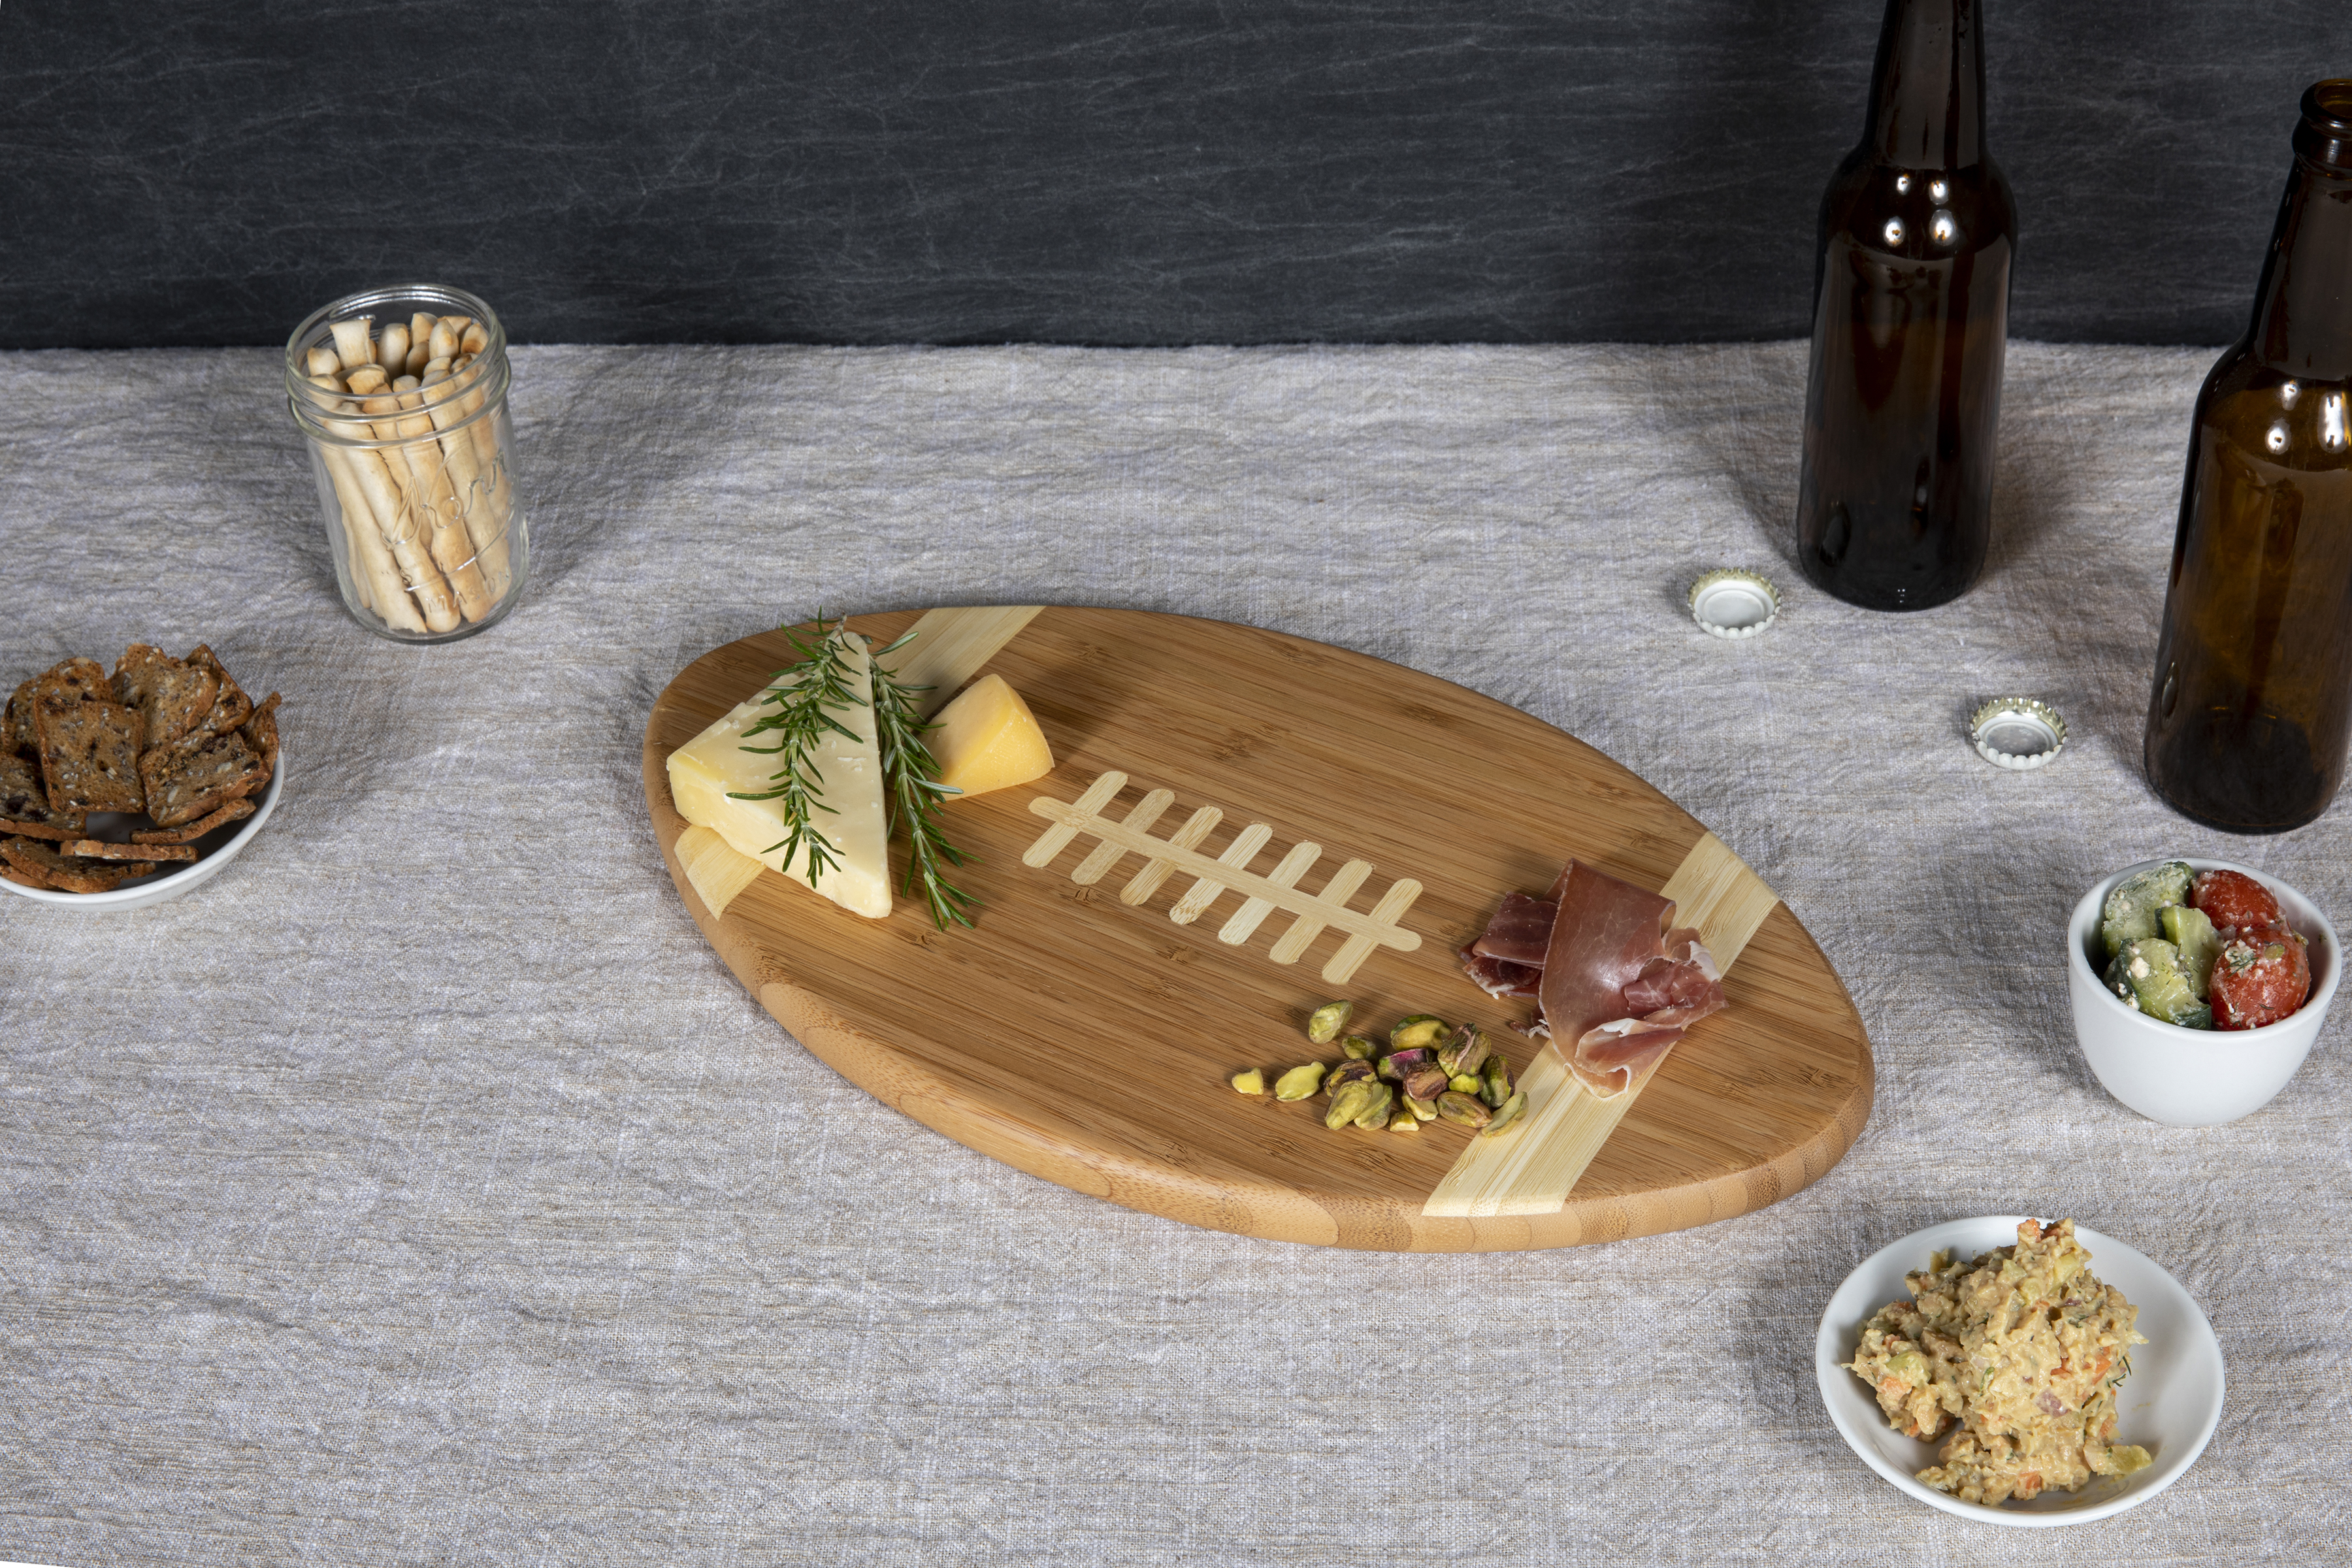 Stanford Cardinal - Touchdown! Football Cutting Board & Serving Tray